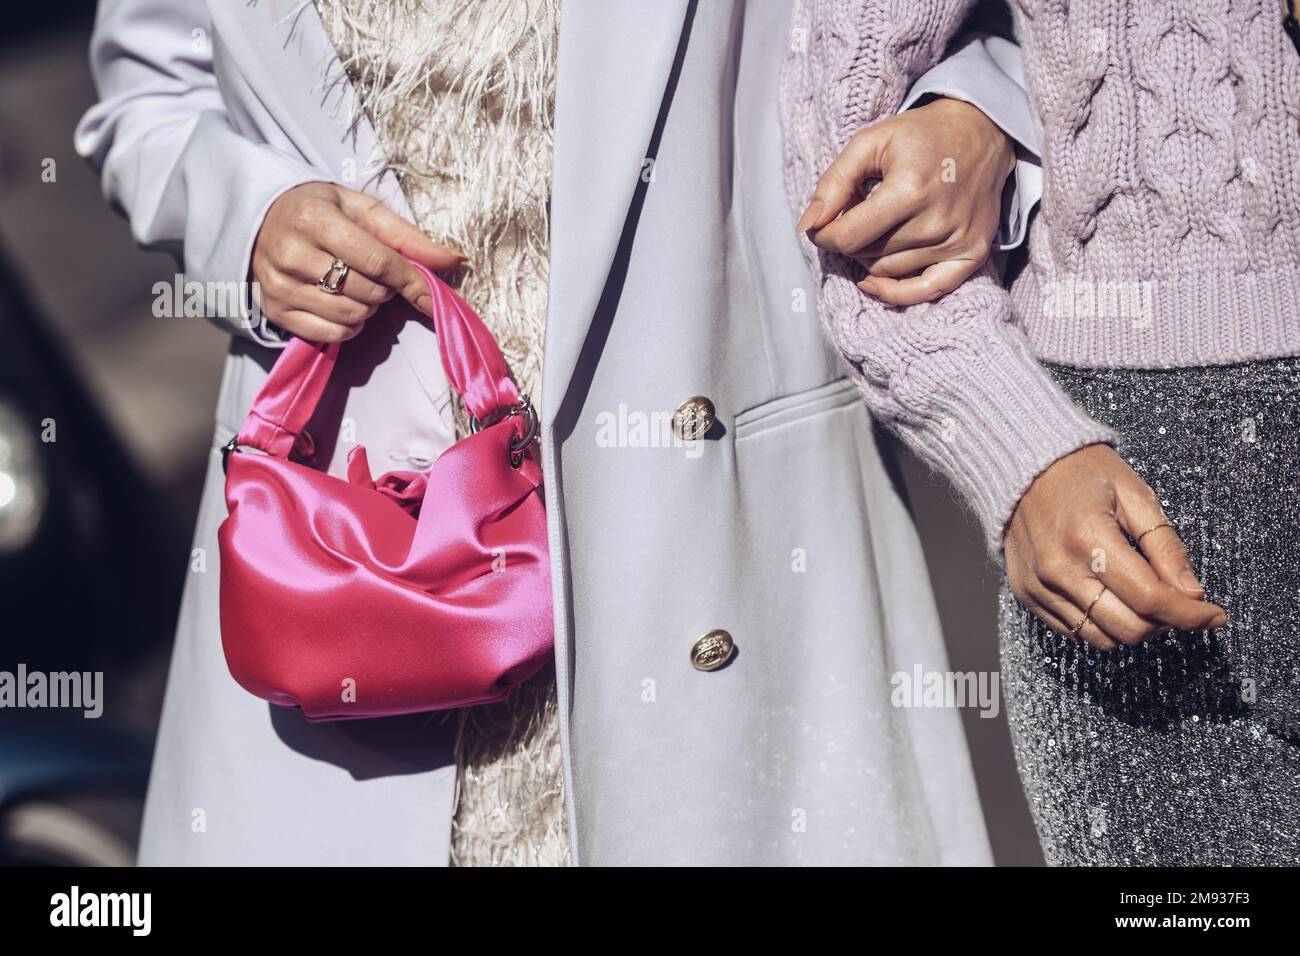 Milan, Italy - February 26, 2022: Woman in stylish outfit with pink bag holding arm of girlfriend. Stock Photo